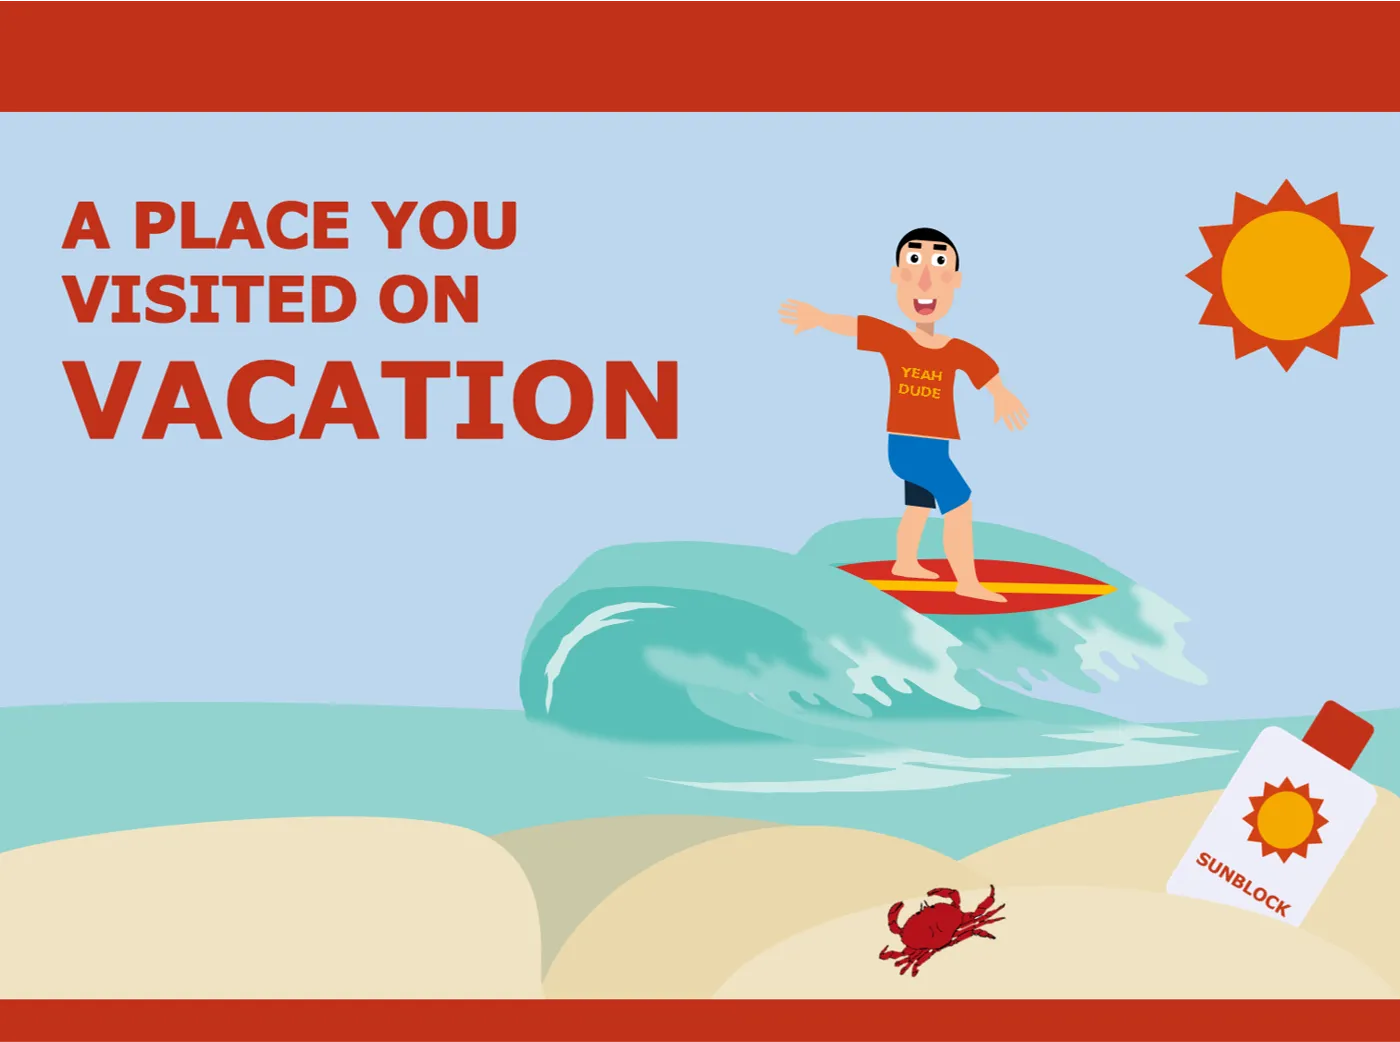 IELTS TOPIC: A Place You Visited On a Vacation